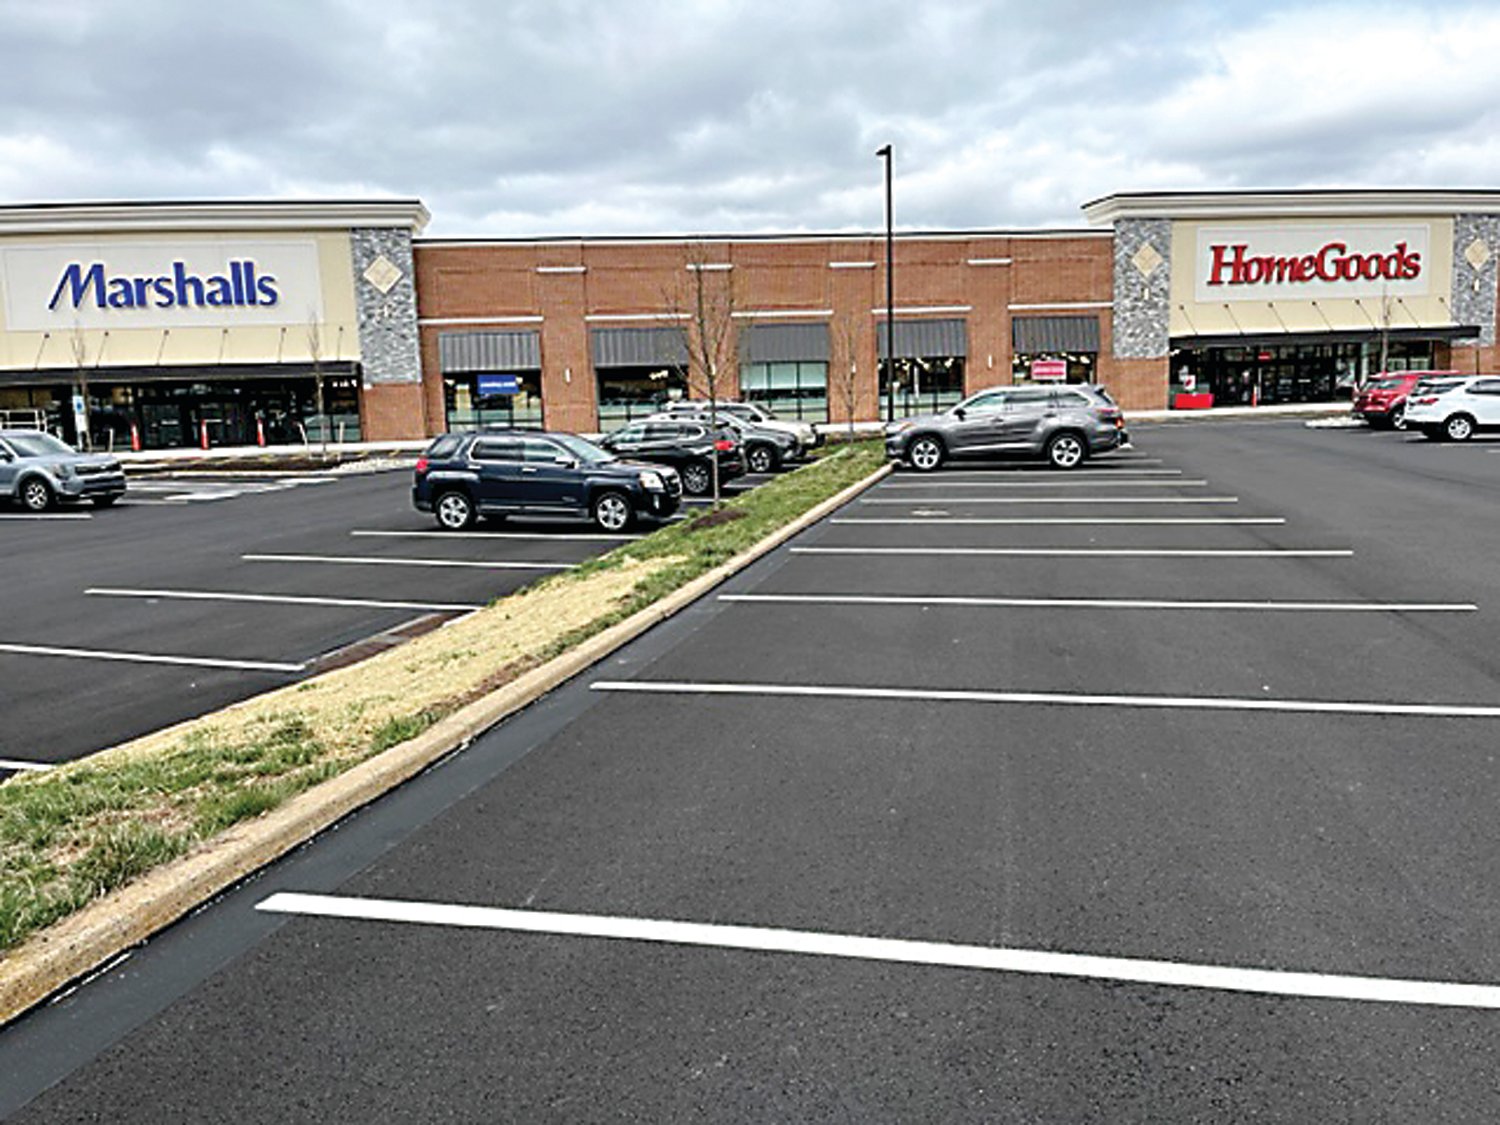 Marshalls and HomeGoods are sharing side-by-side stores in this 58,000-square-foot space at the re-imagined Cross Keys Place in Plumstead Township. The paired stores will open April 6.